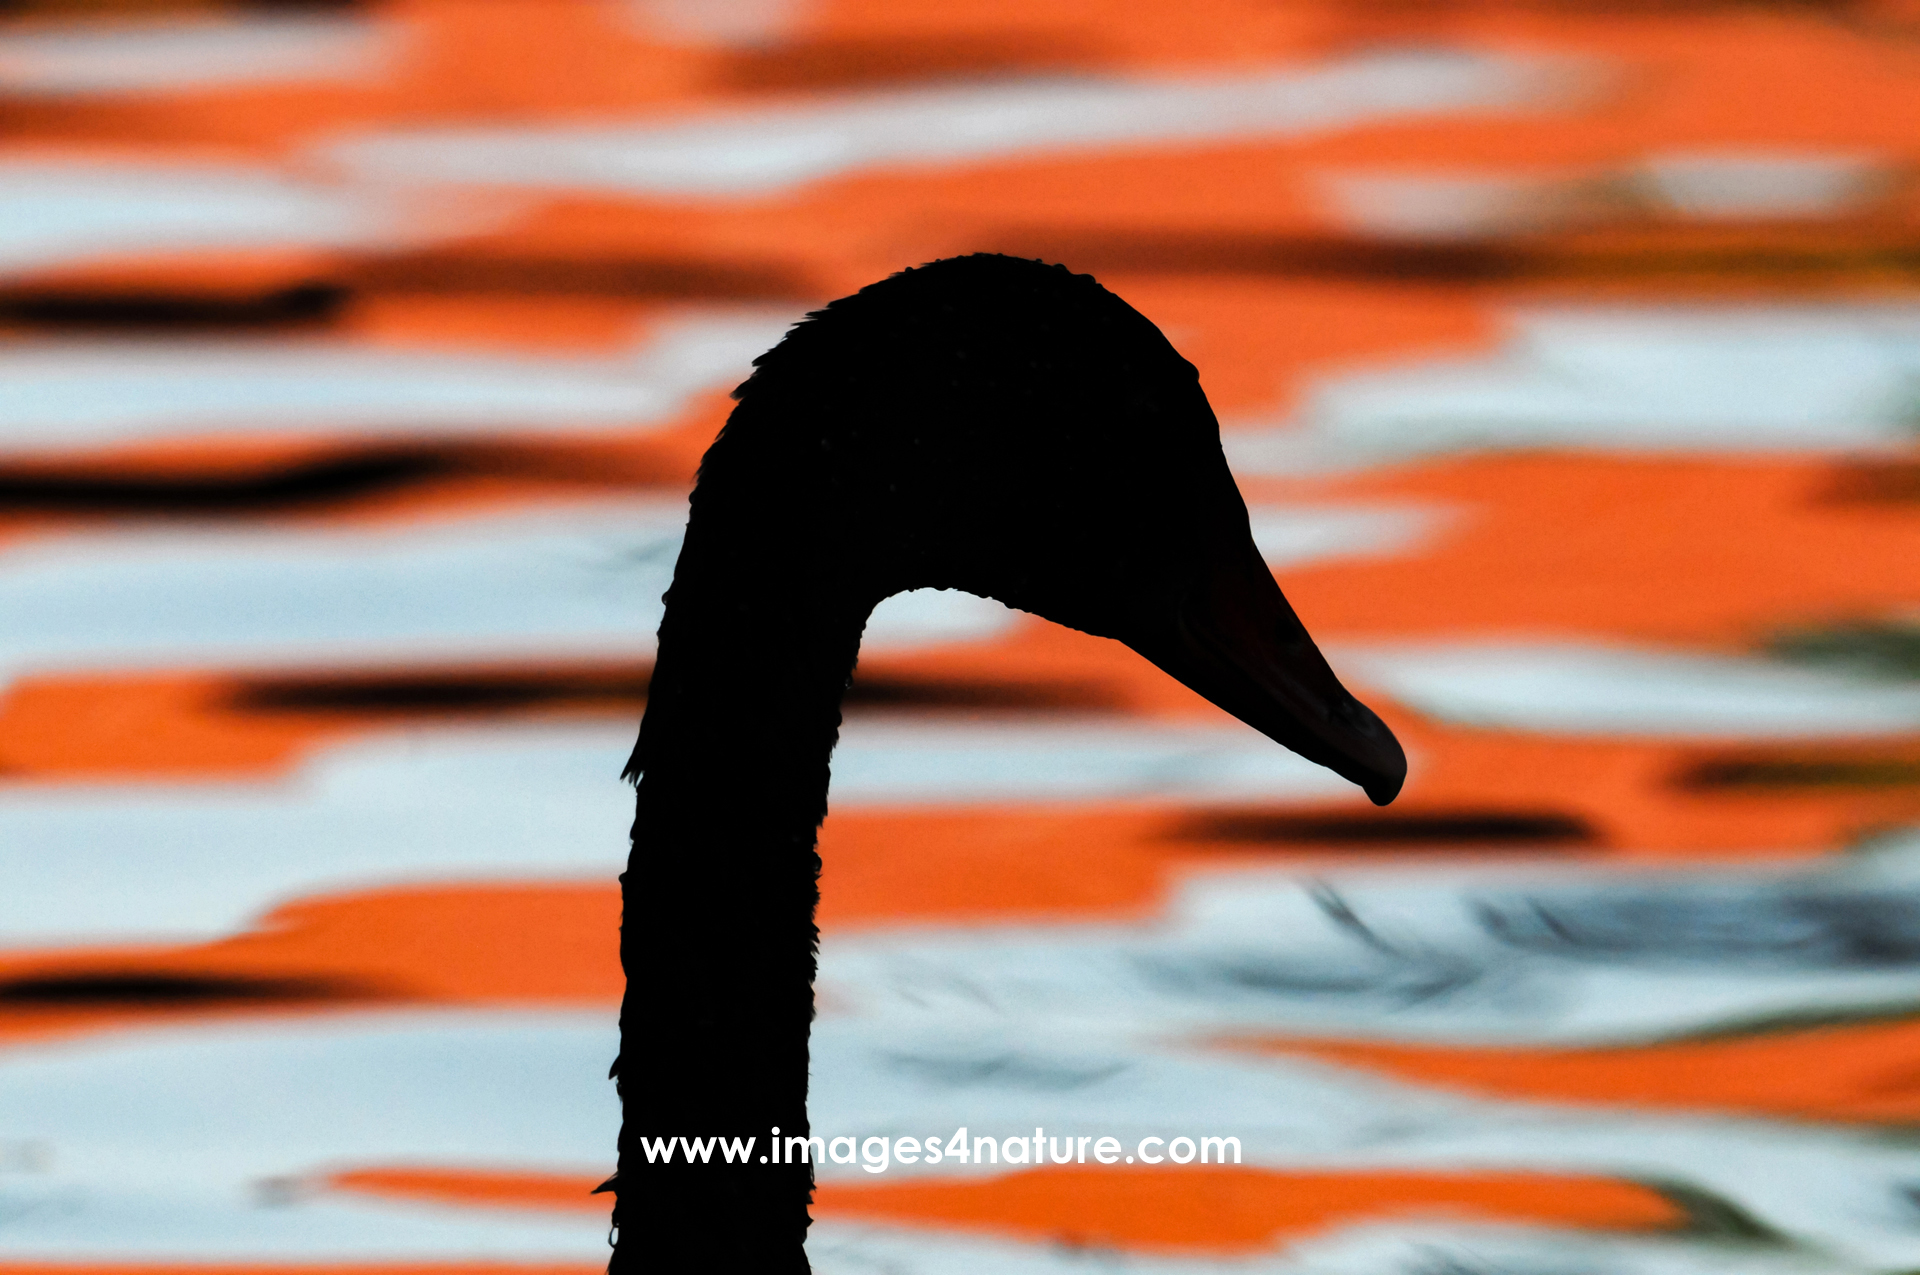 Silhouette of black swan against colorful orange water reflections